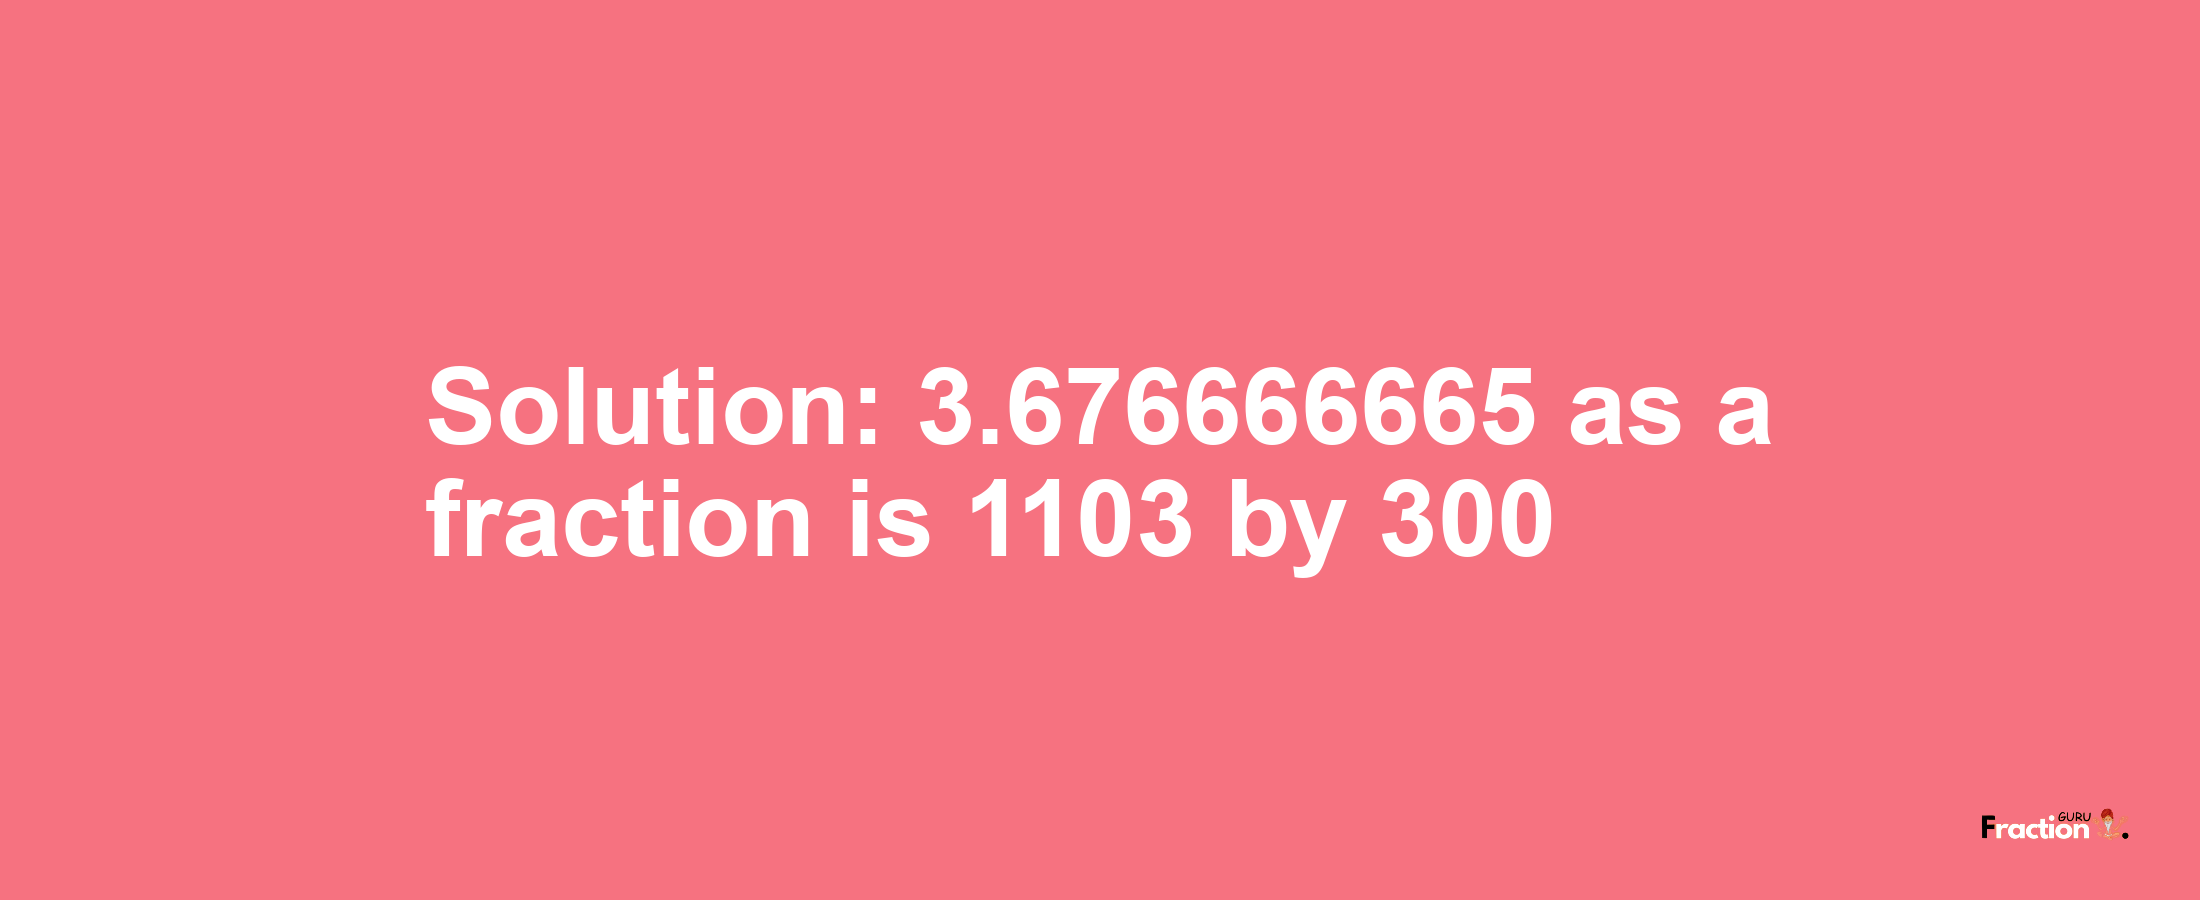 Solution:3.676666665 as a fraction is 1103/300